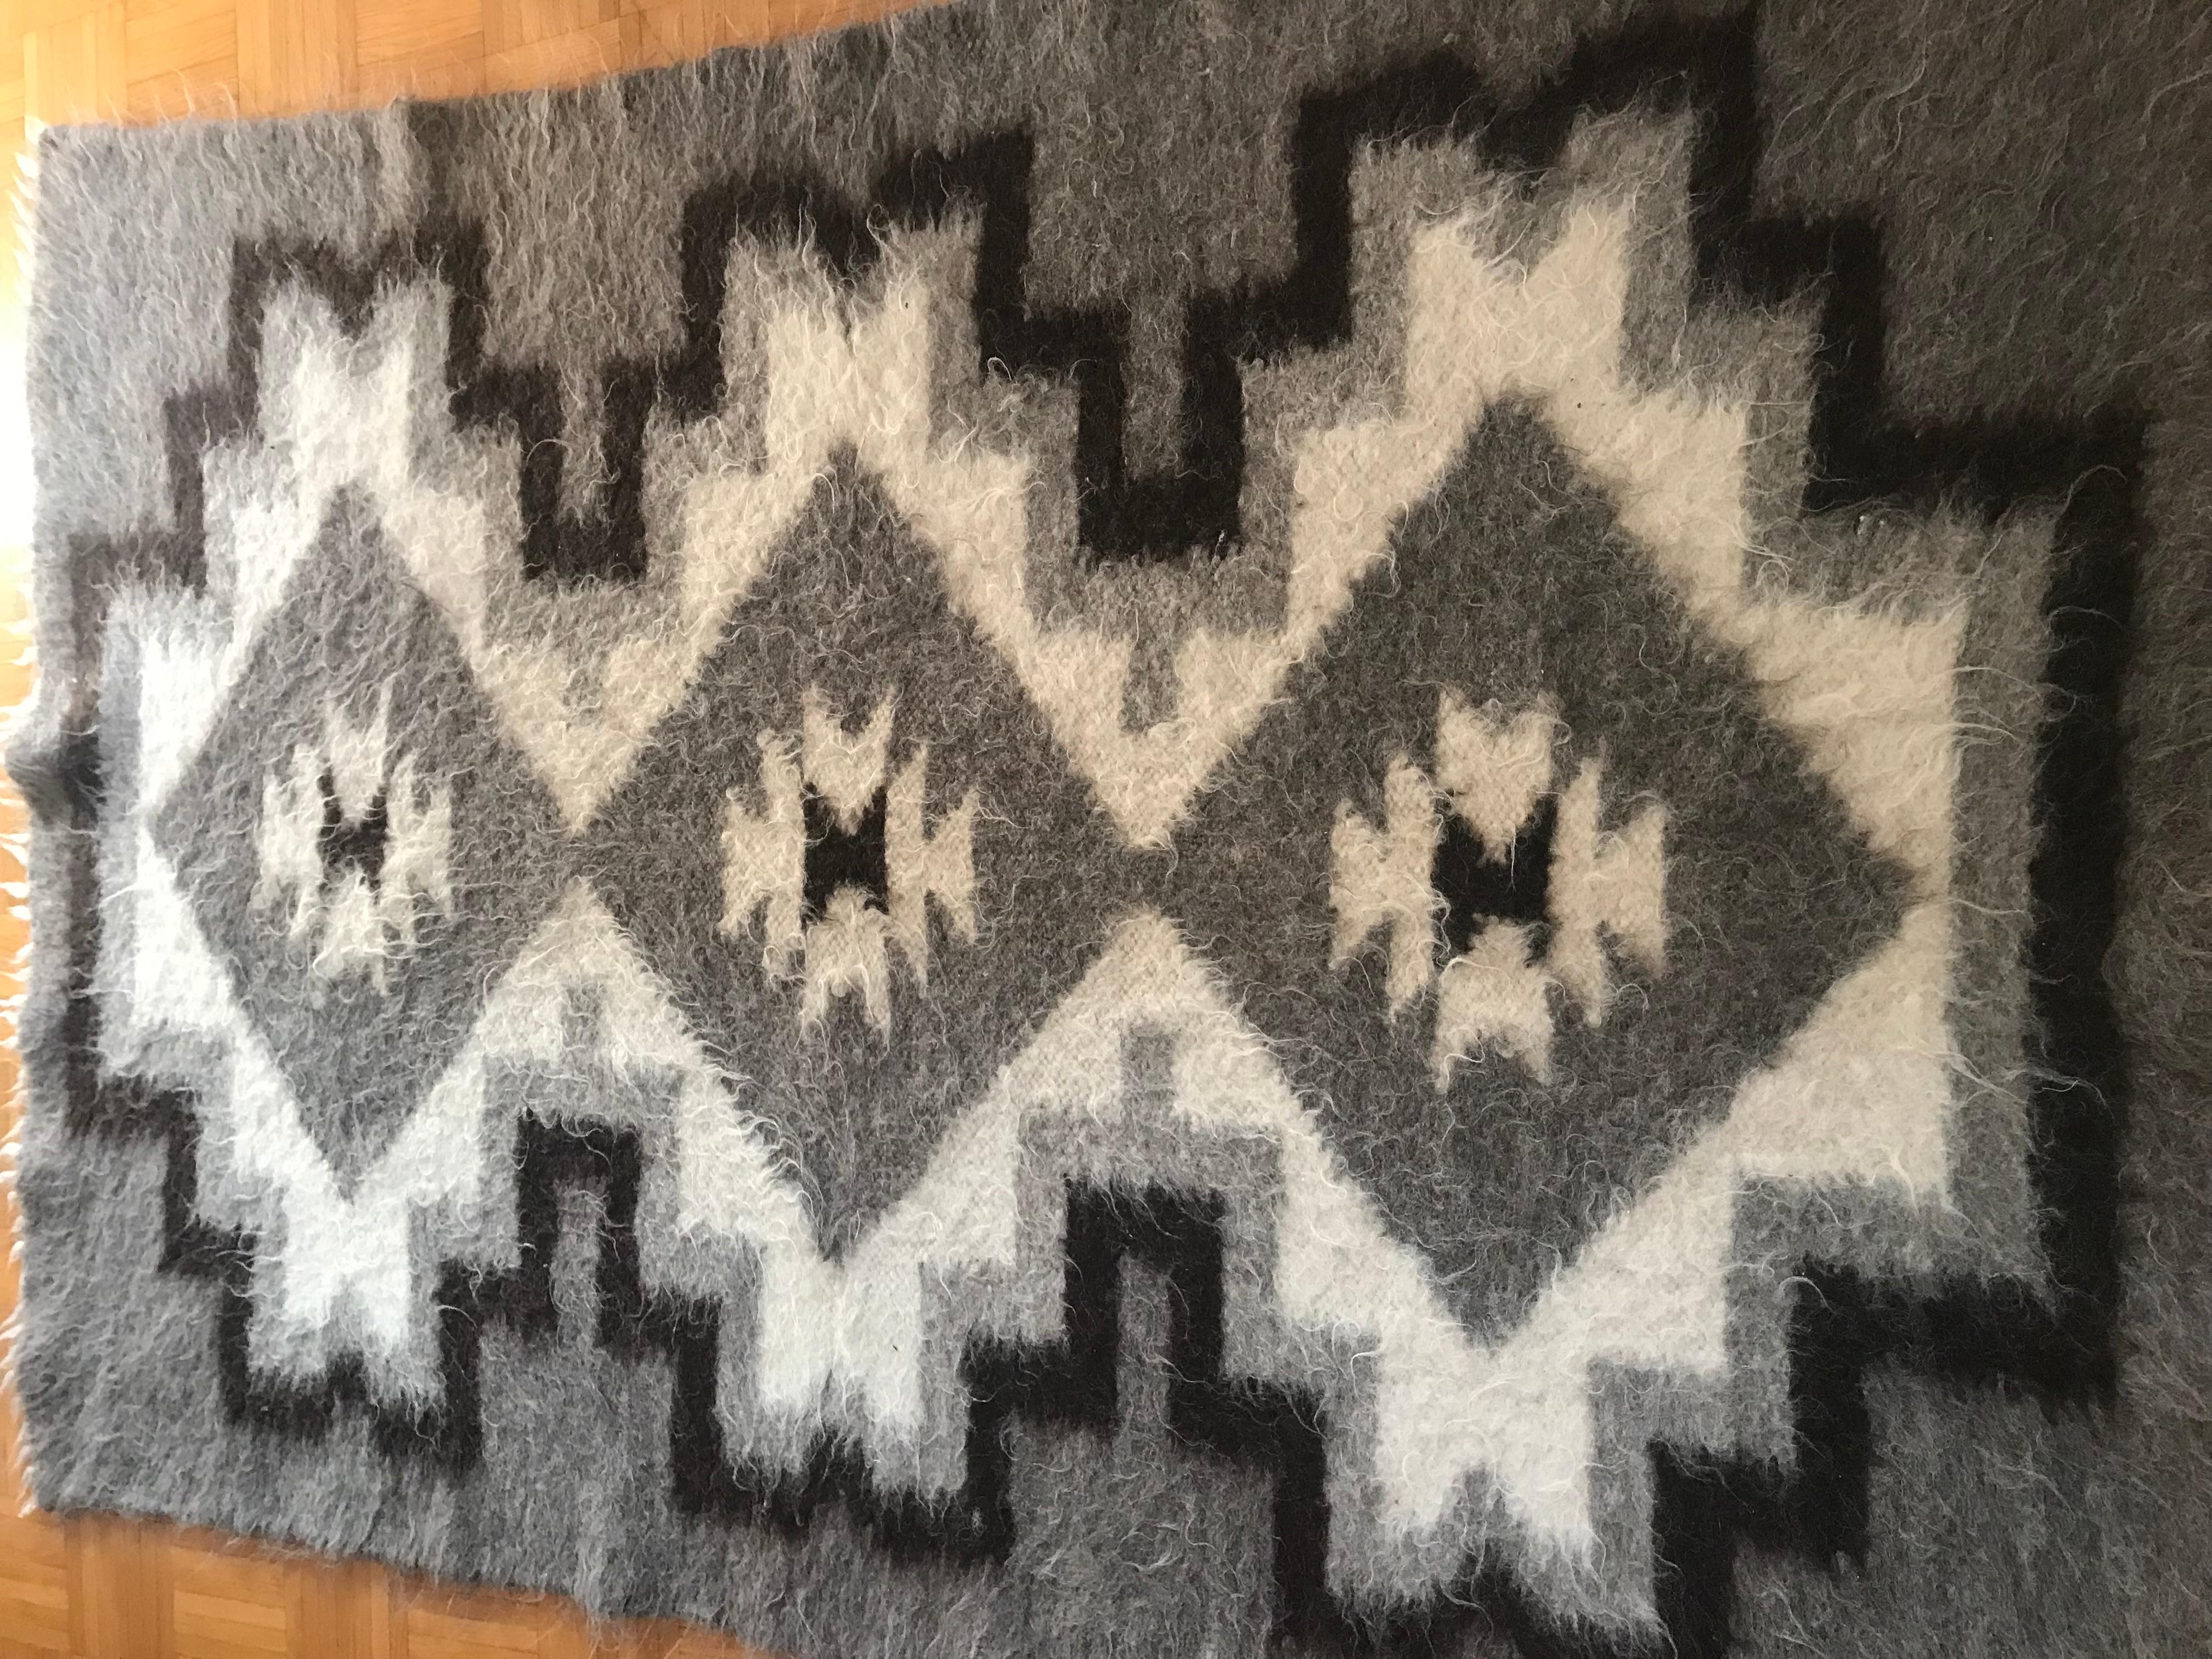  Sheep Wool Rug Throw Carpet Log Cabin In Good Condition For Sale In Boca Raton, FL